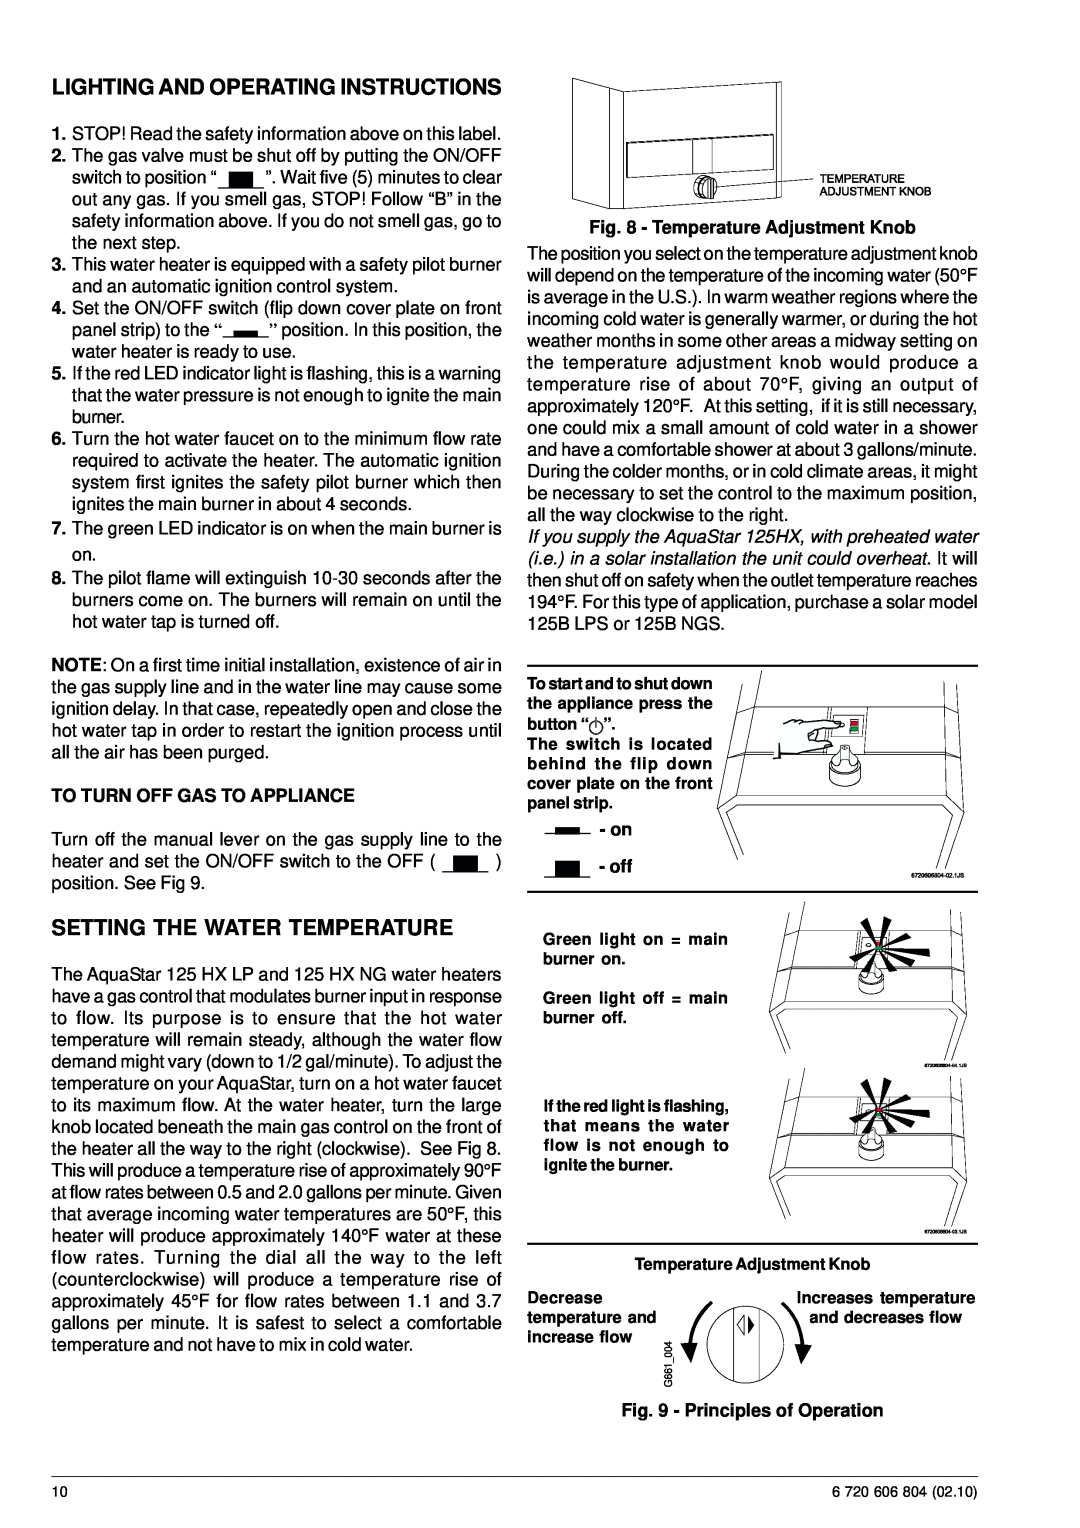 Bosch Appliances 125HX NG Lighting And Operating Instructions, Setting The Water Temperature, To Turn Off Gas To Appliance 